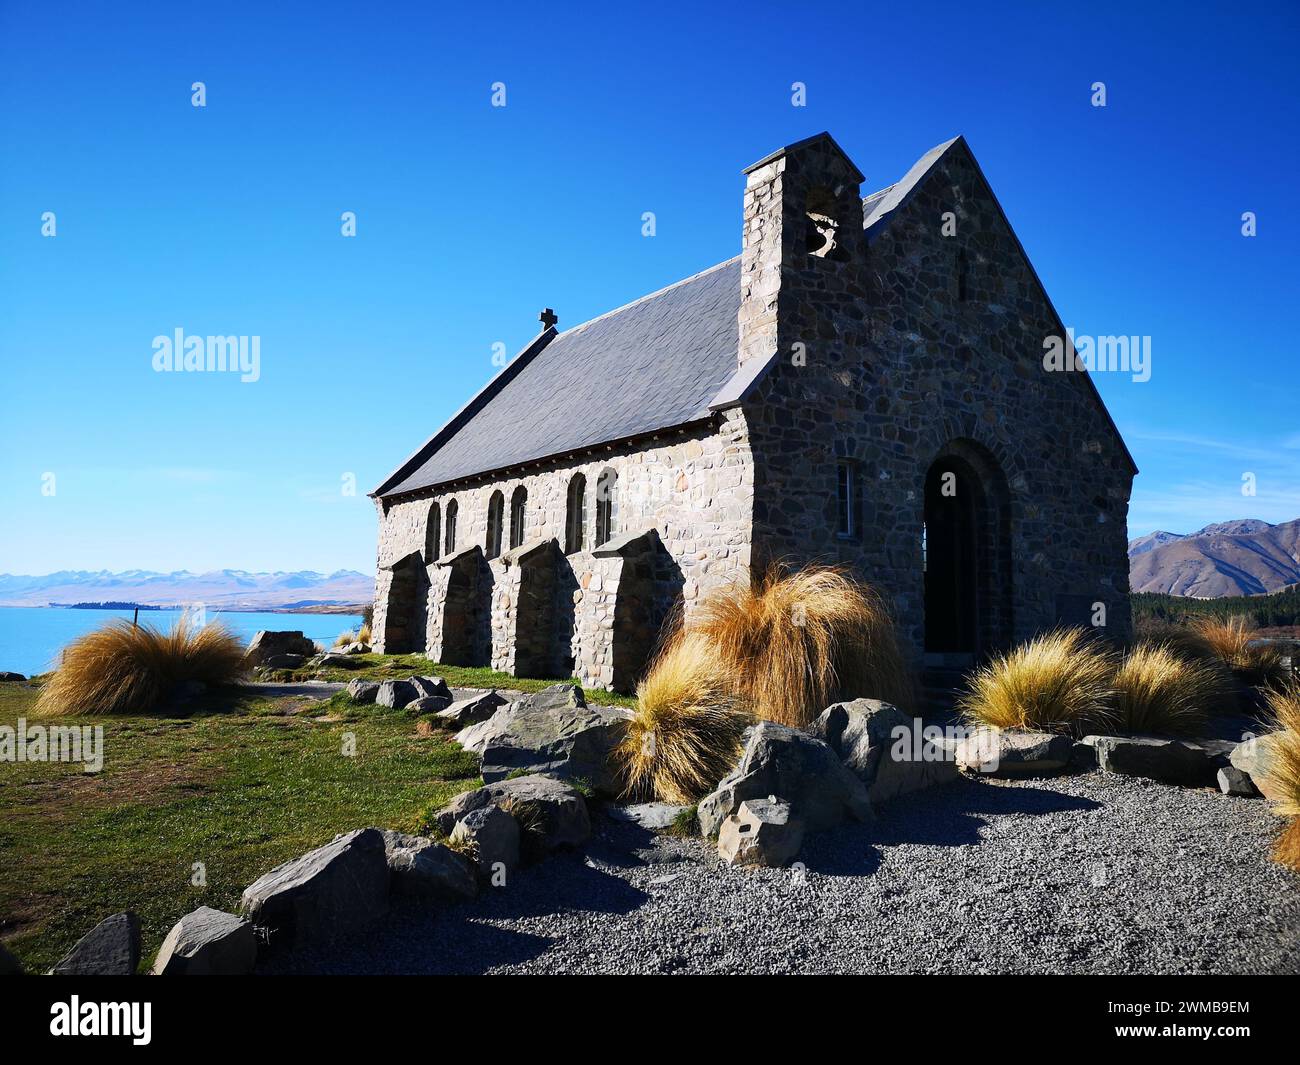 The Church of the Good Shepherd, Lake Tekapo, New Zealand. The most photographed church in the world. Stock Photo